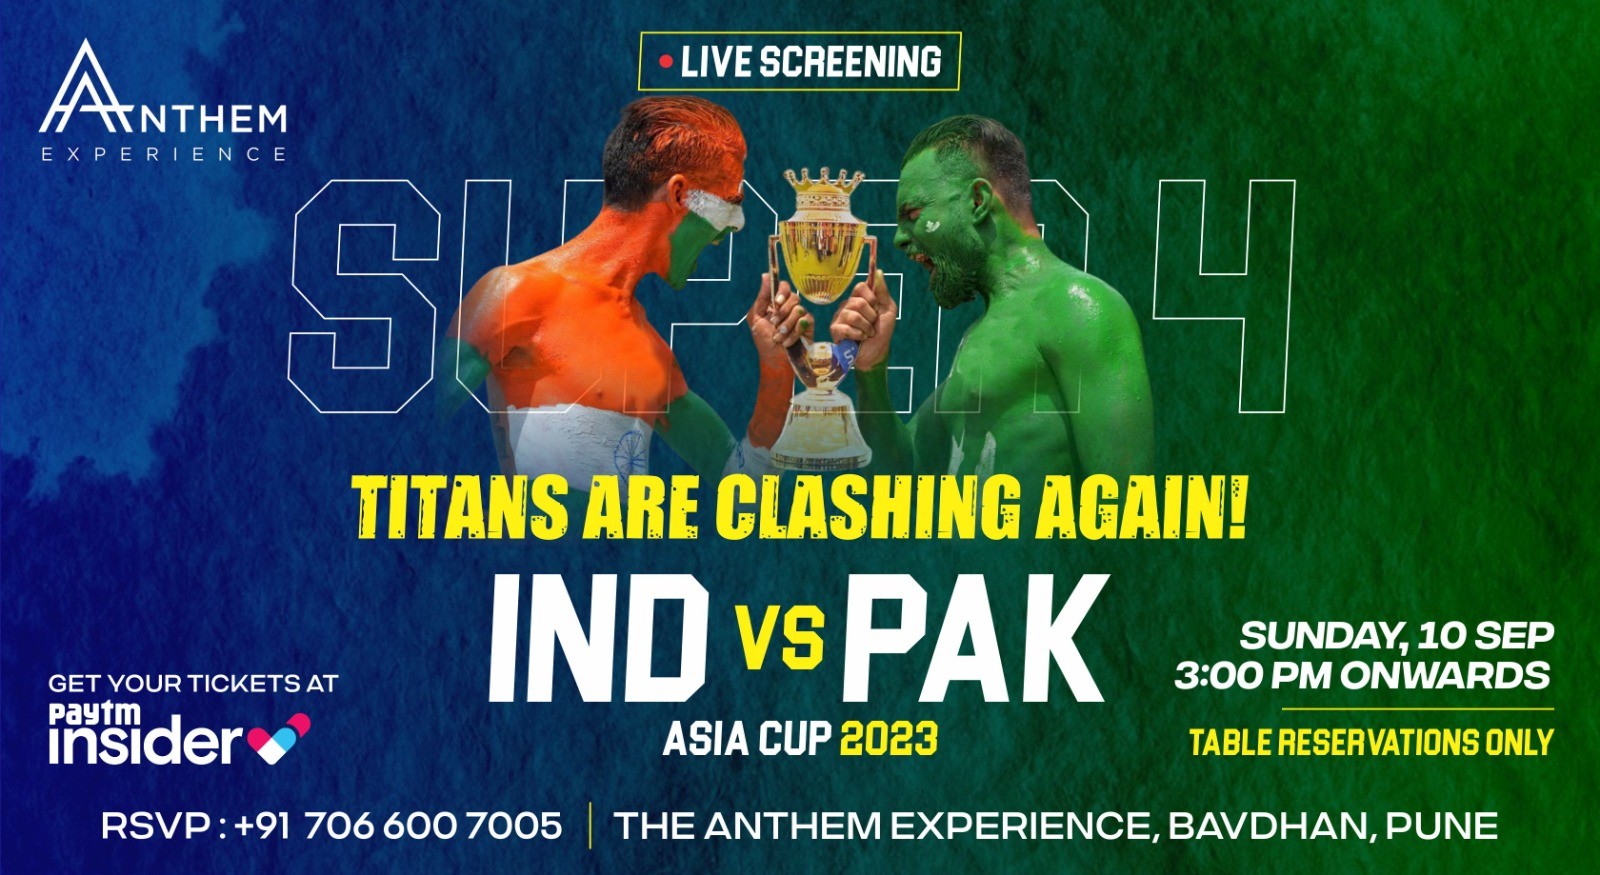 Asia Cup 2023-Super 4-India Vs Pakistan Live Screening at The Anthem Experience